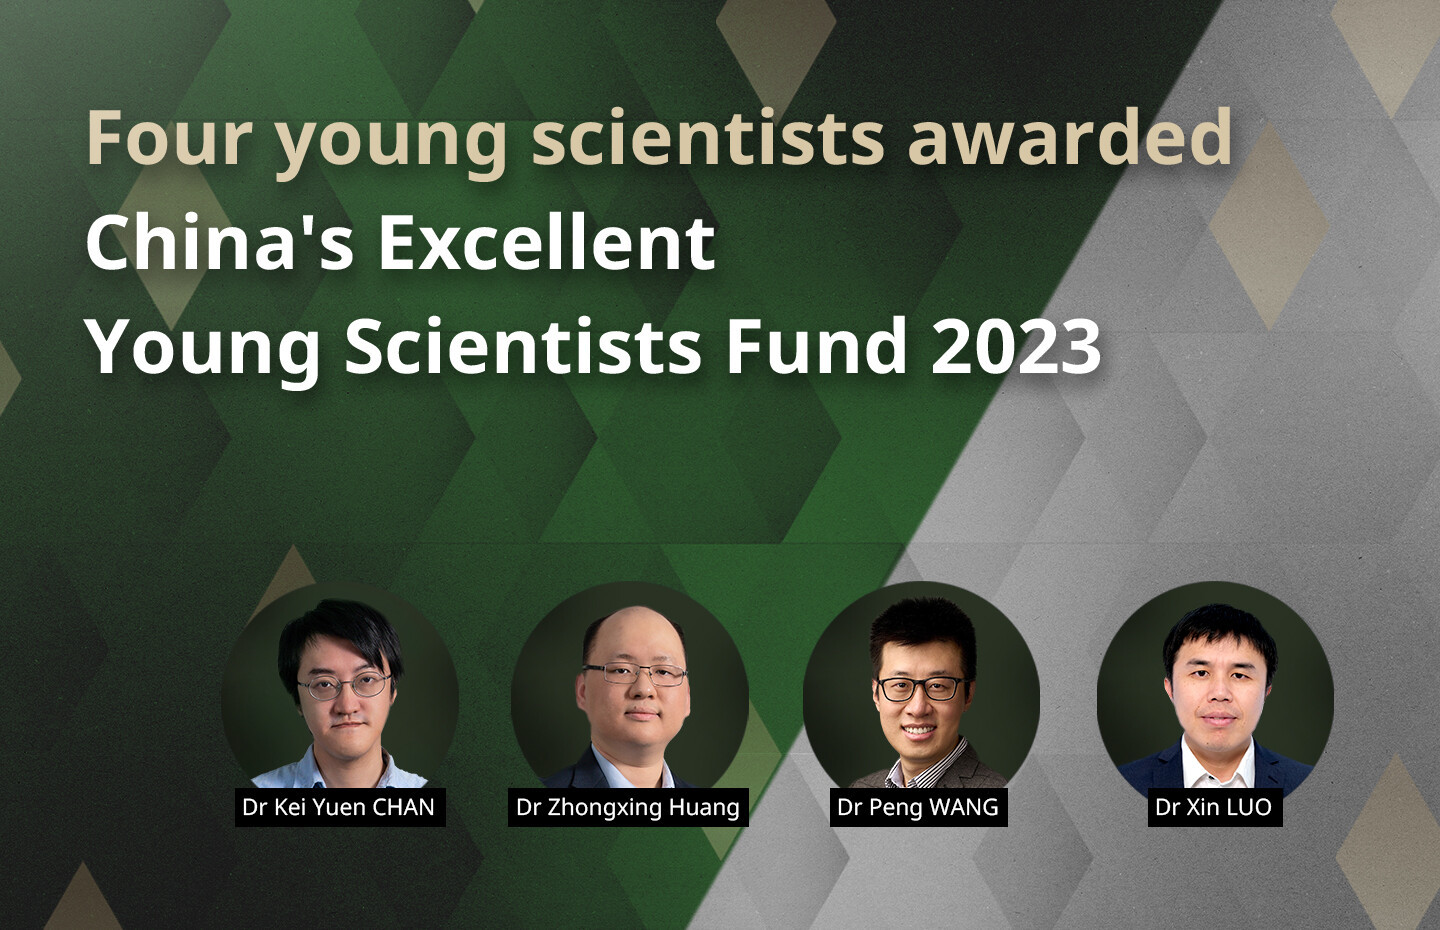 Four young scientists awarded China's Excellent Young Scientists Fund 2023